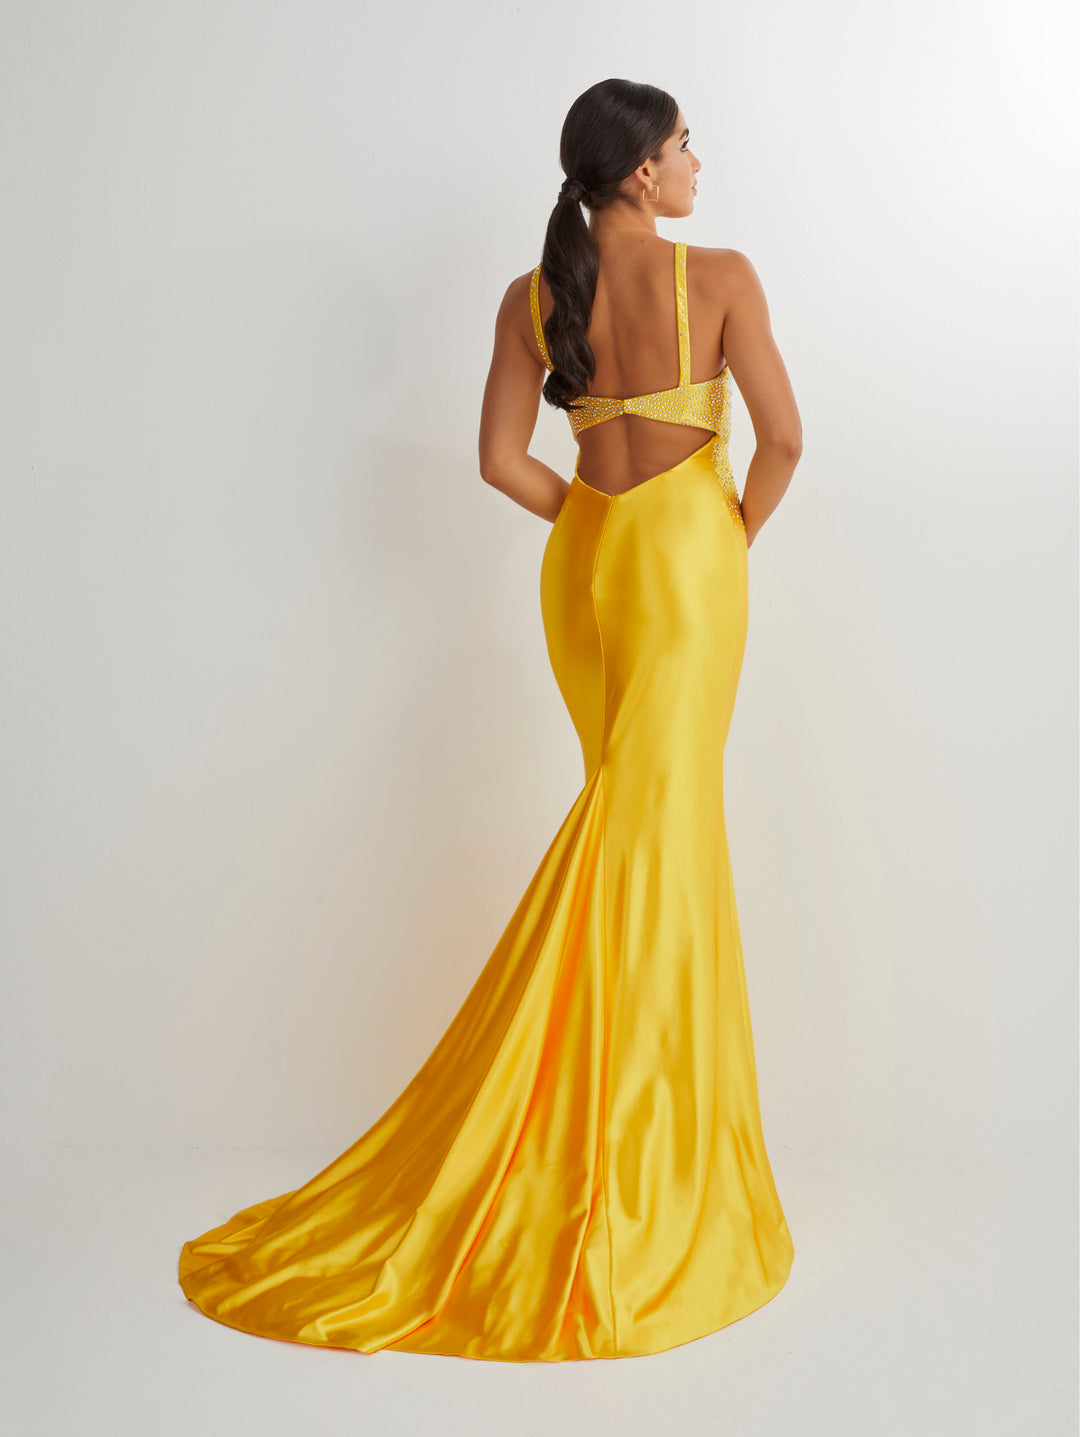 Beaded Spandex Halter Keyhole Gown by Studio 17 12894